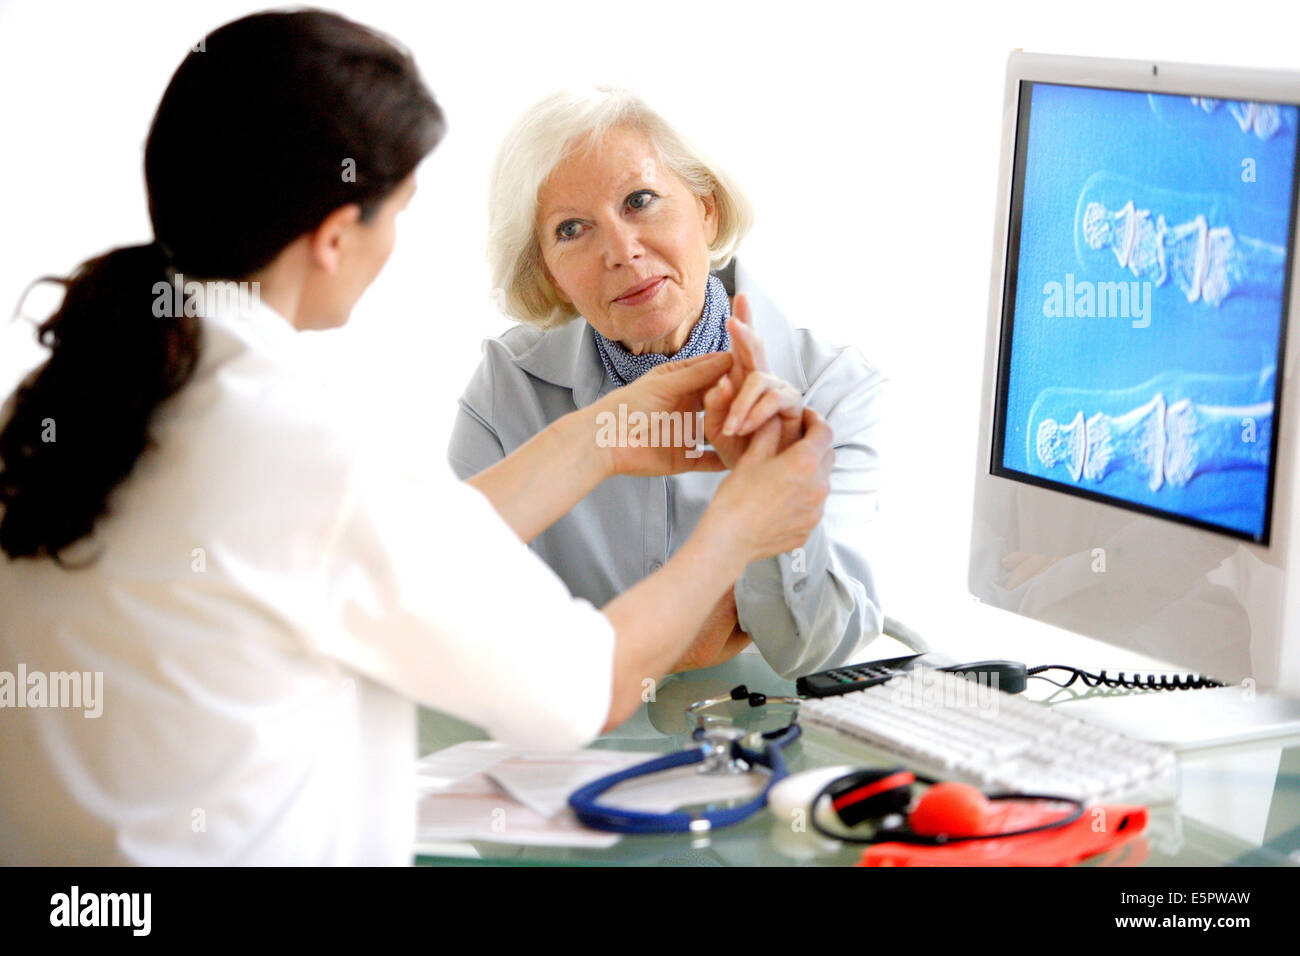 Doctor examining the hand of a female patient. Stock Photo